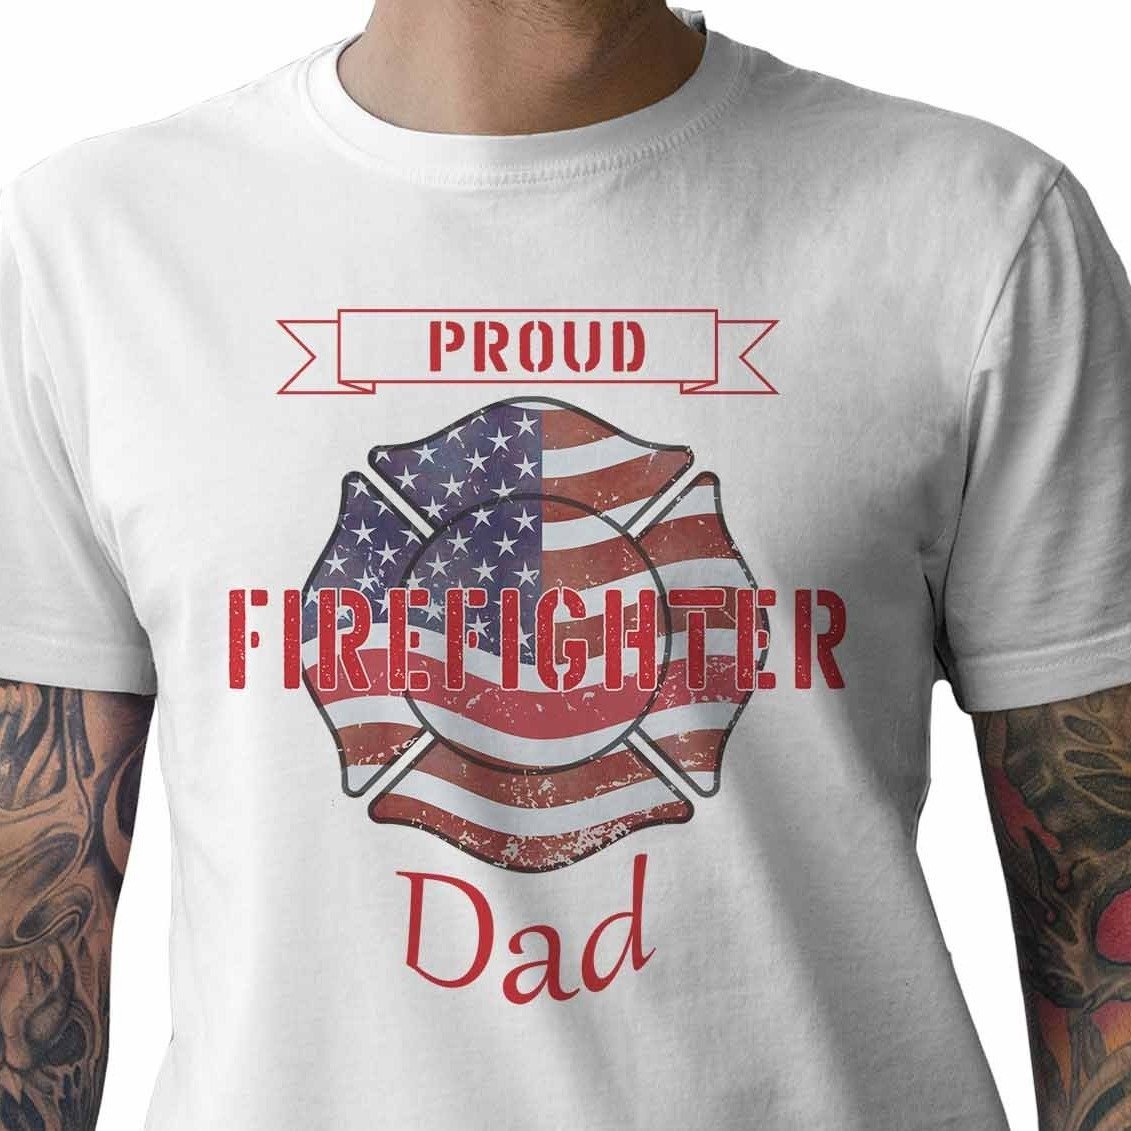 Proud Firefighter Dad - My Custom Tee Party